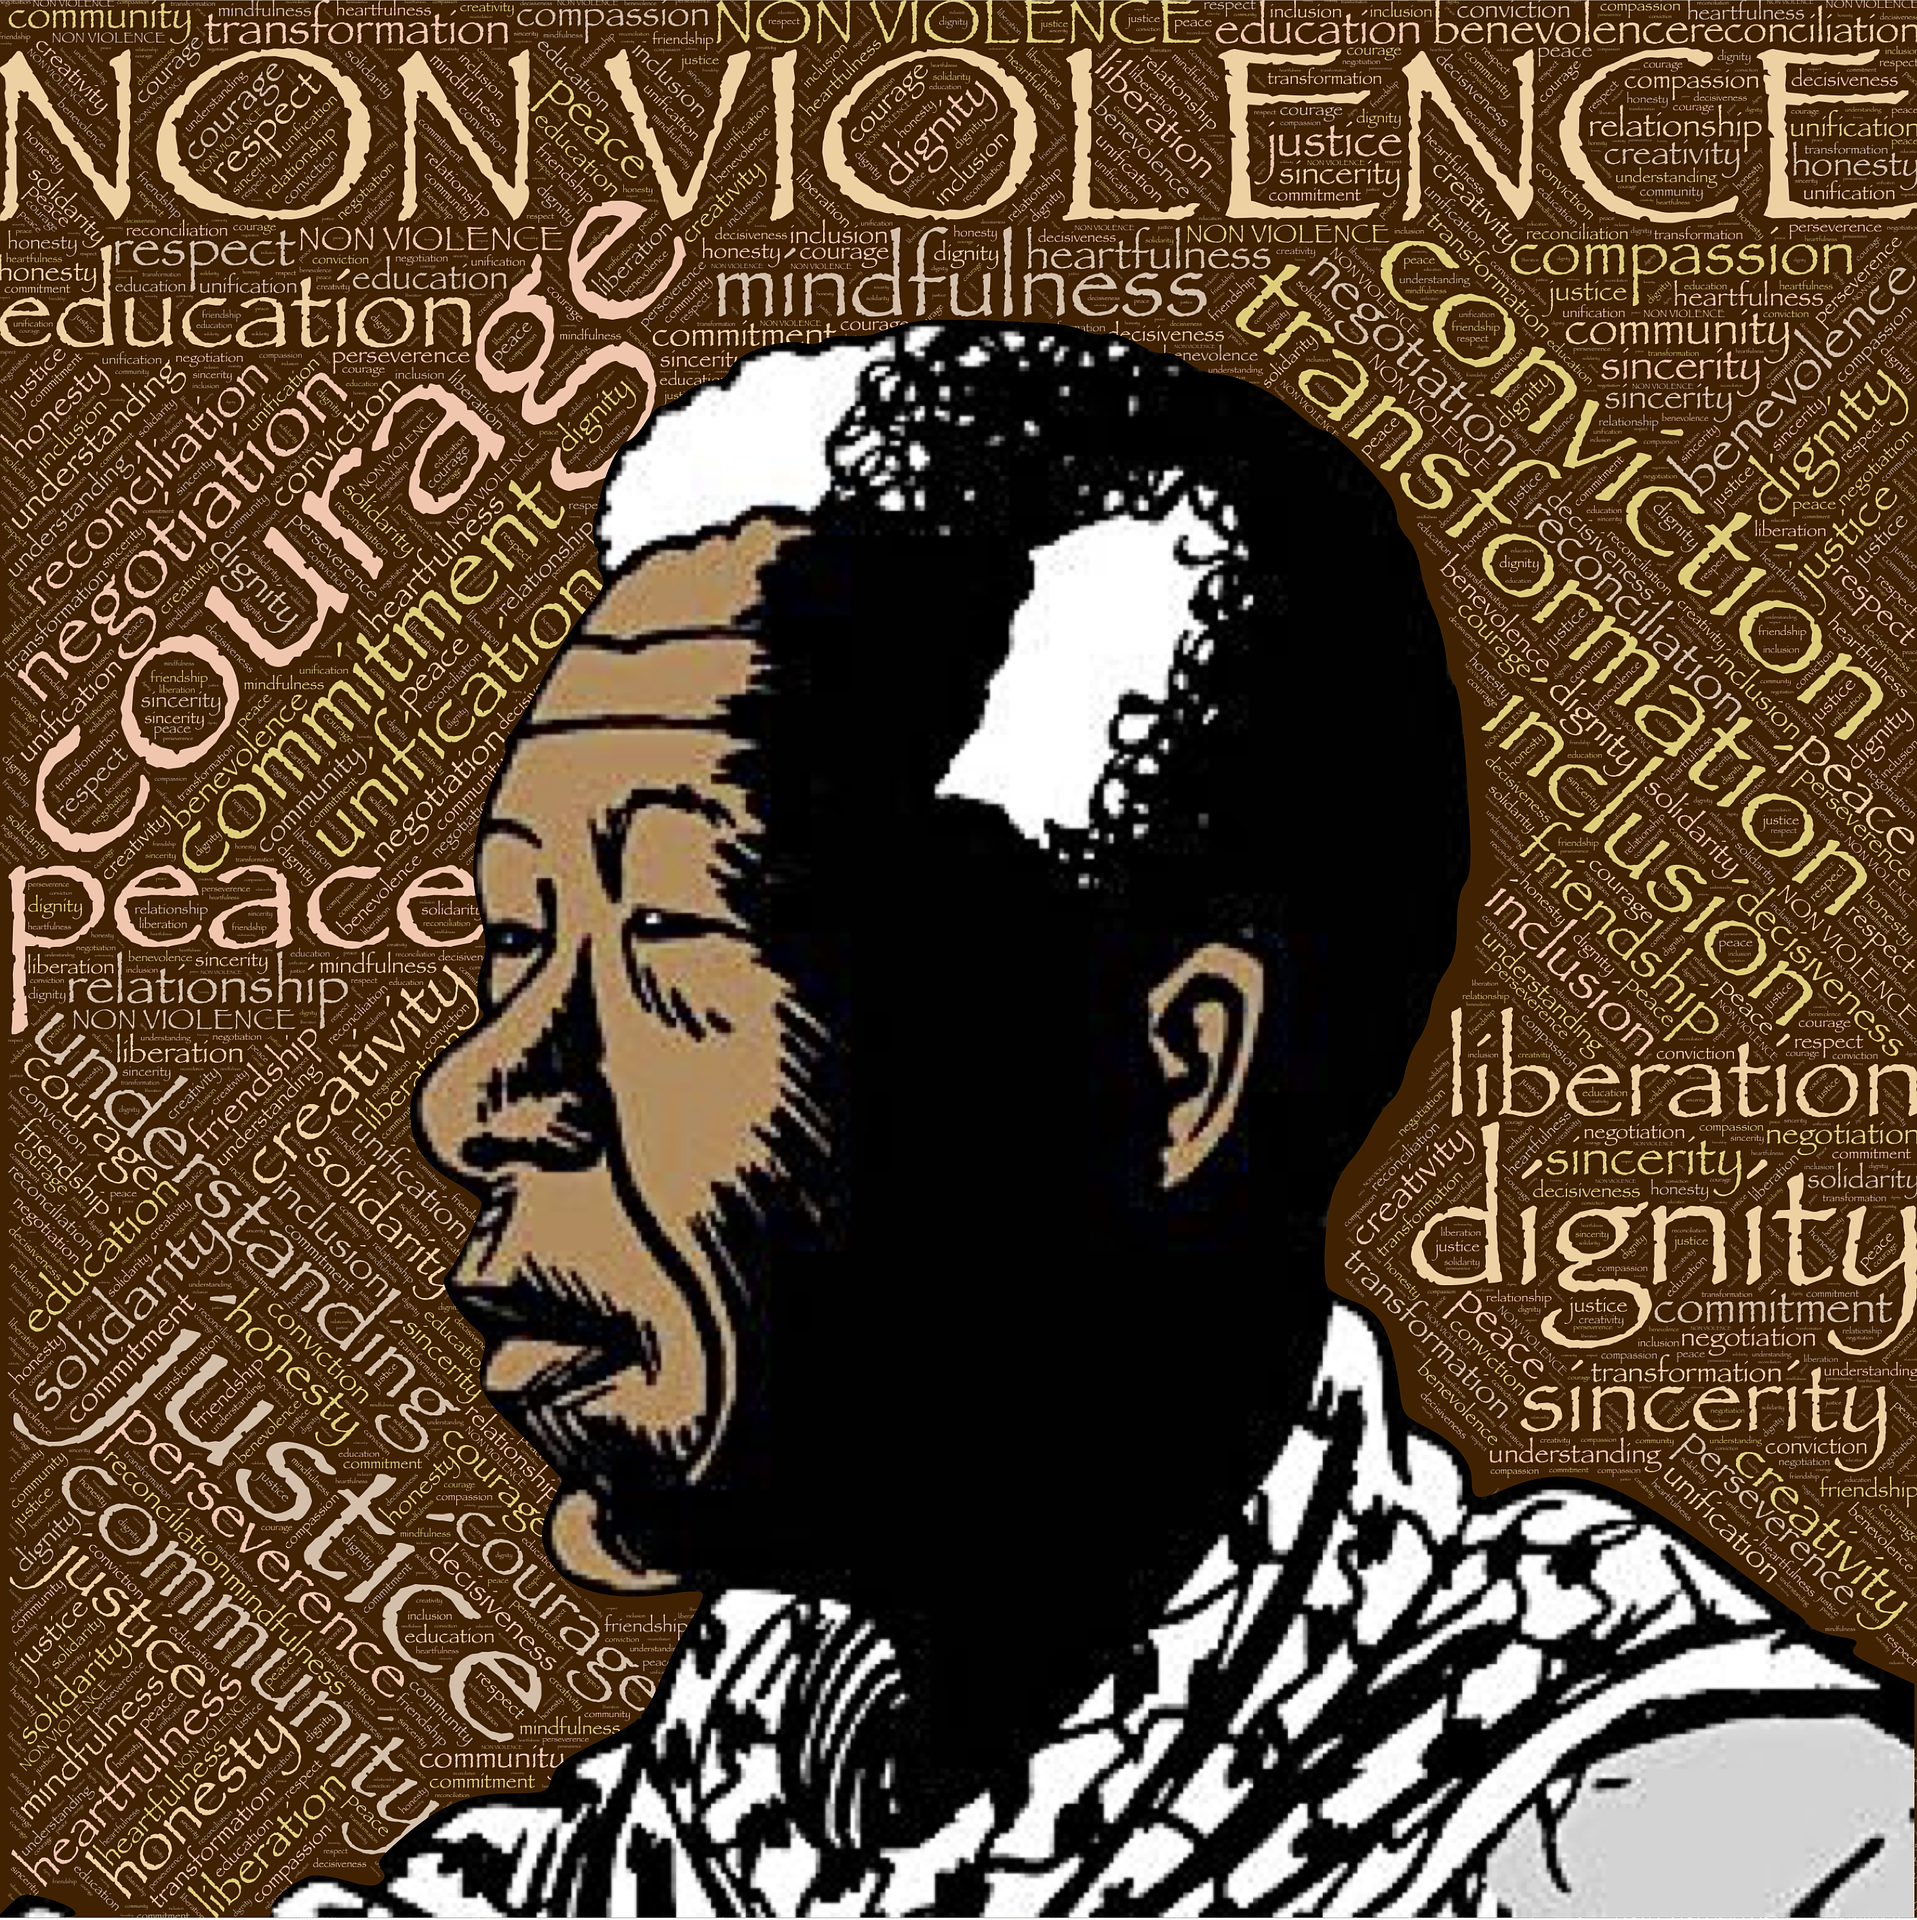 Nonviolence: animated image of Nelson Mandela surrounded by a Word Cloud with words such as peace, courage, liberation, education, justice, dignity, conviction, community, and nonviolence